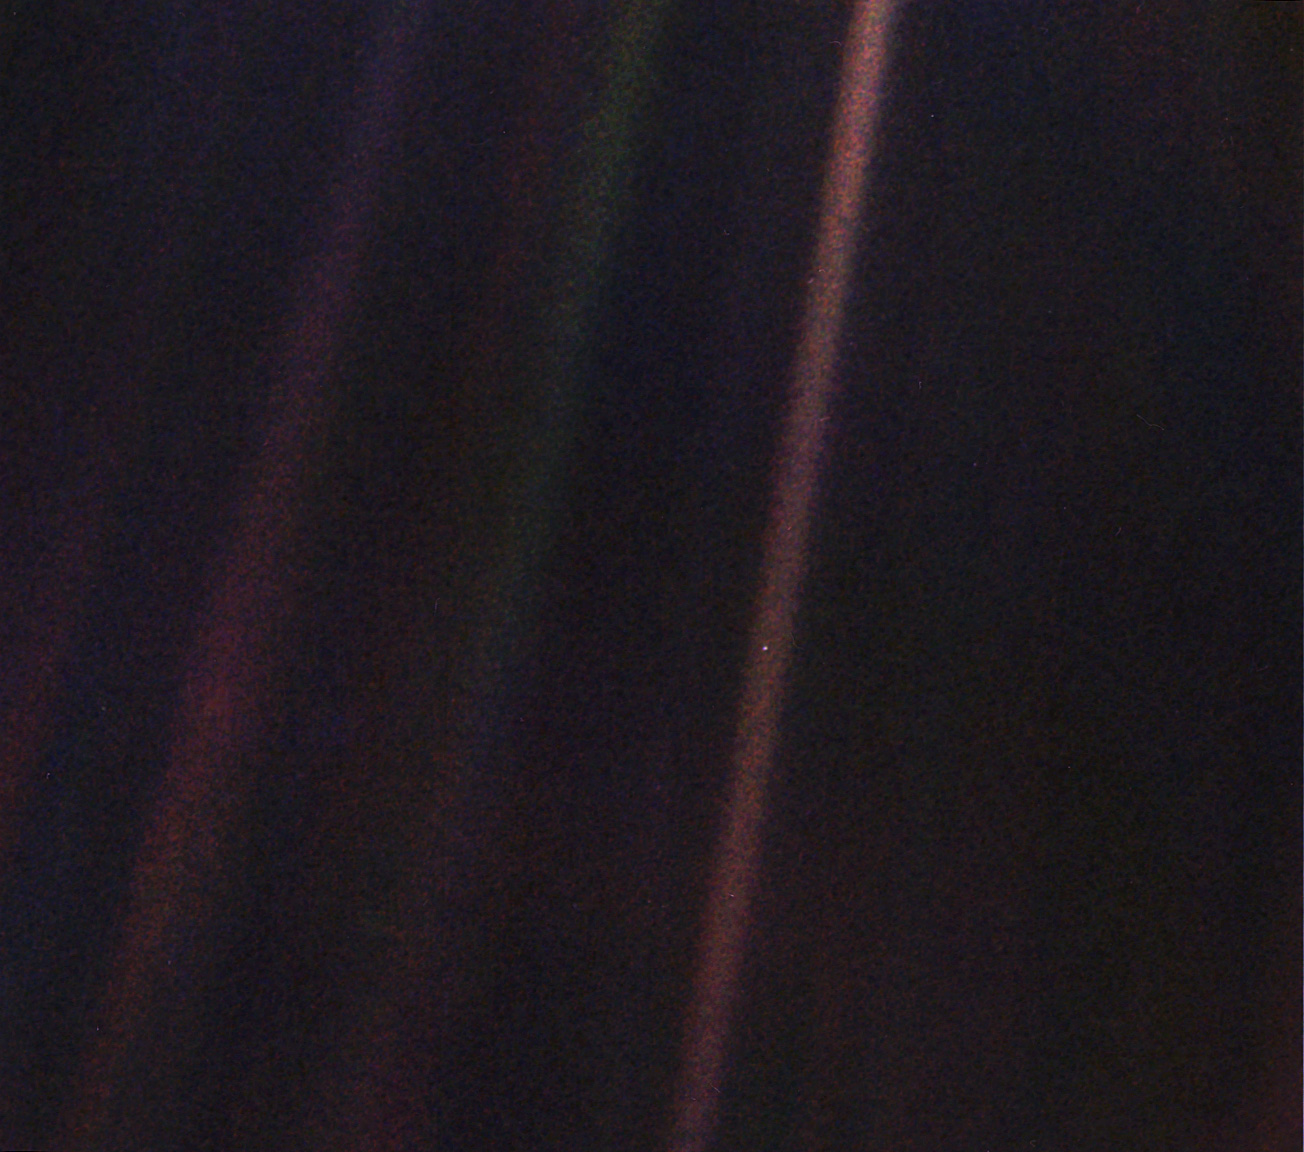 Earth as a tiny pixel in a dust-filled sunbeam